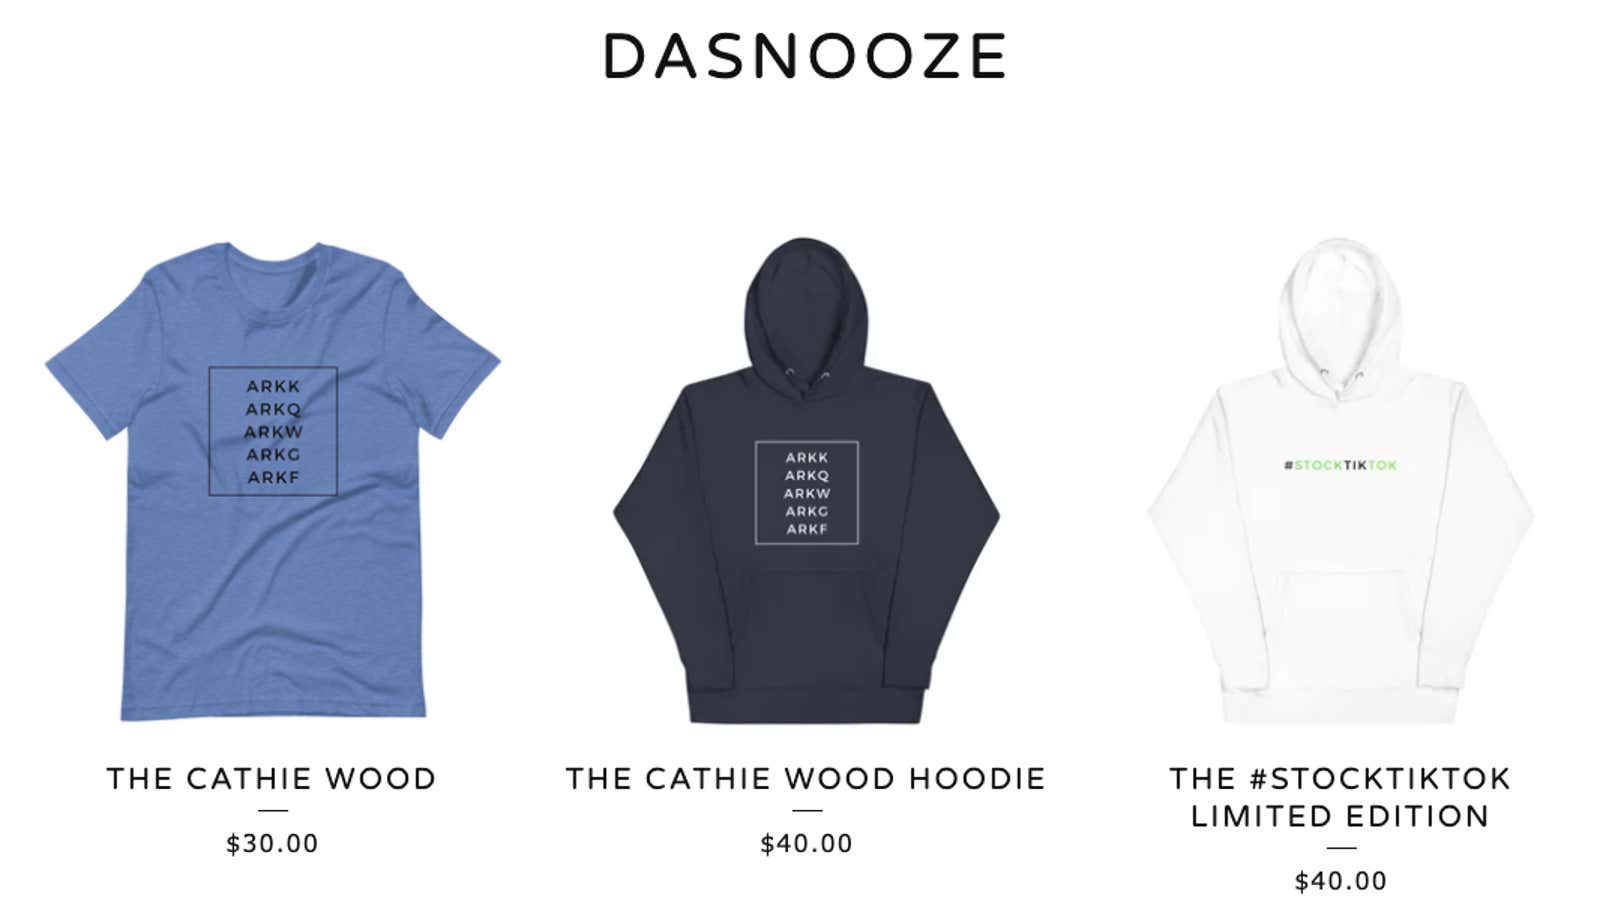 Rockstar stock picker Cathie Wood has inspired a line of merchandise